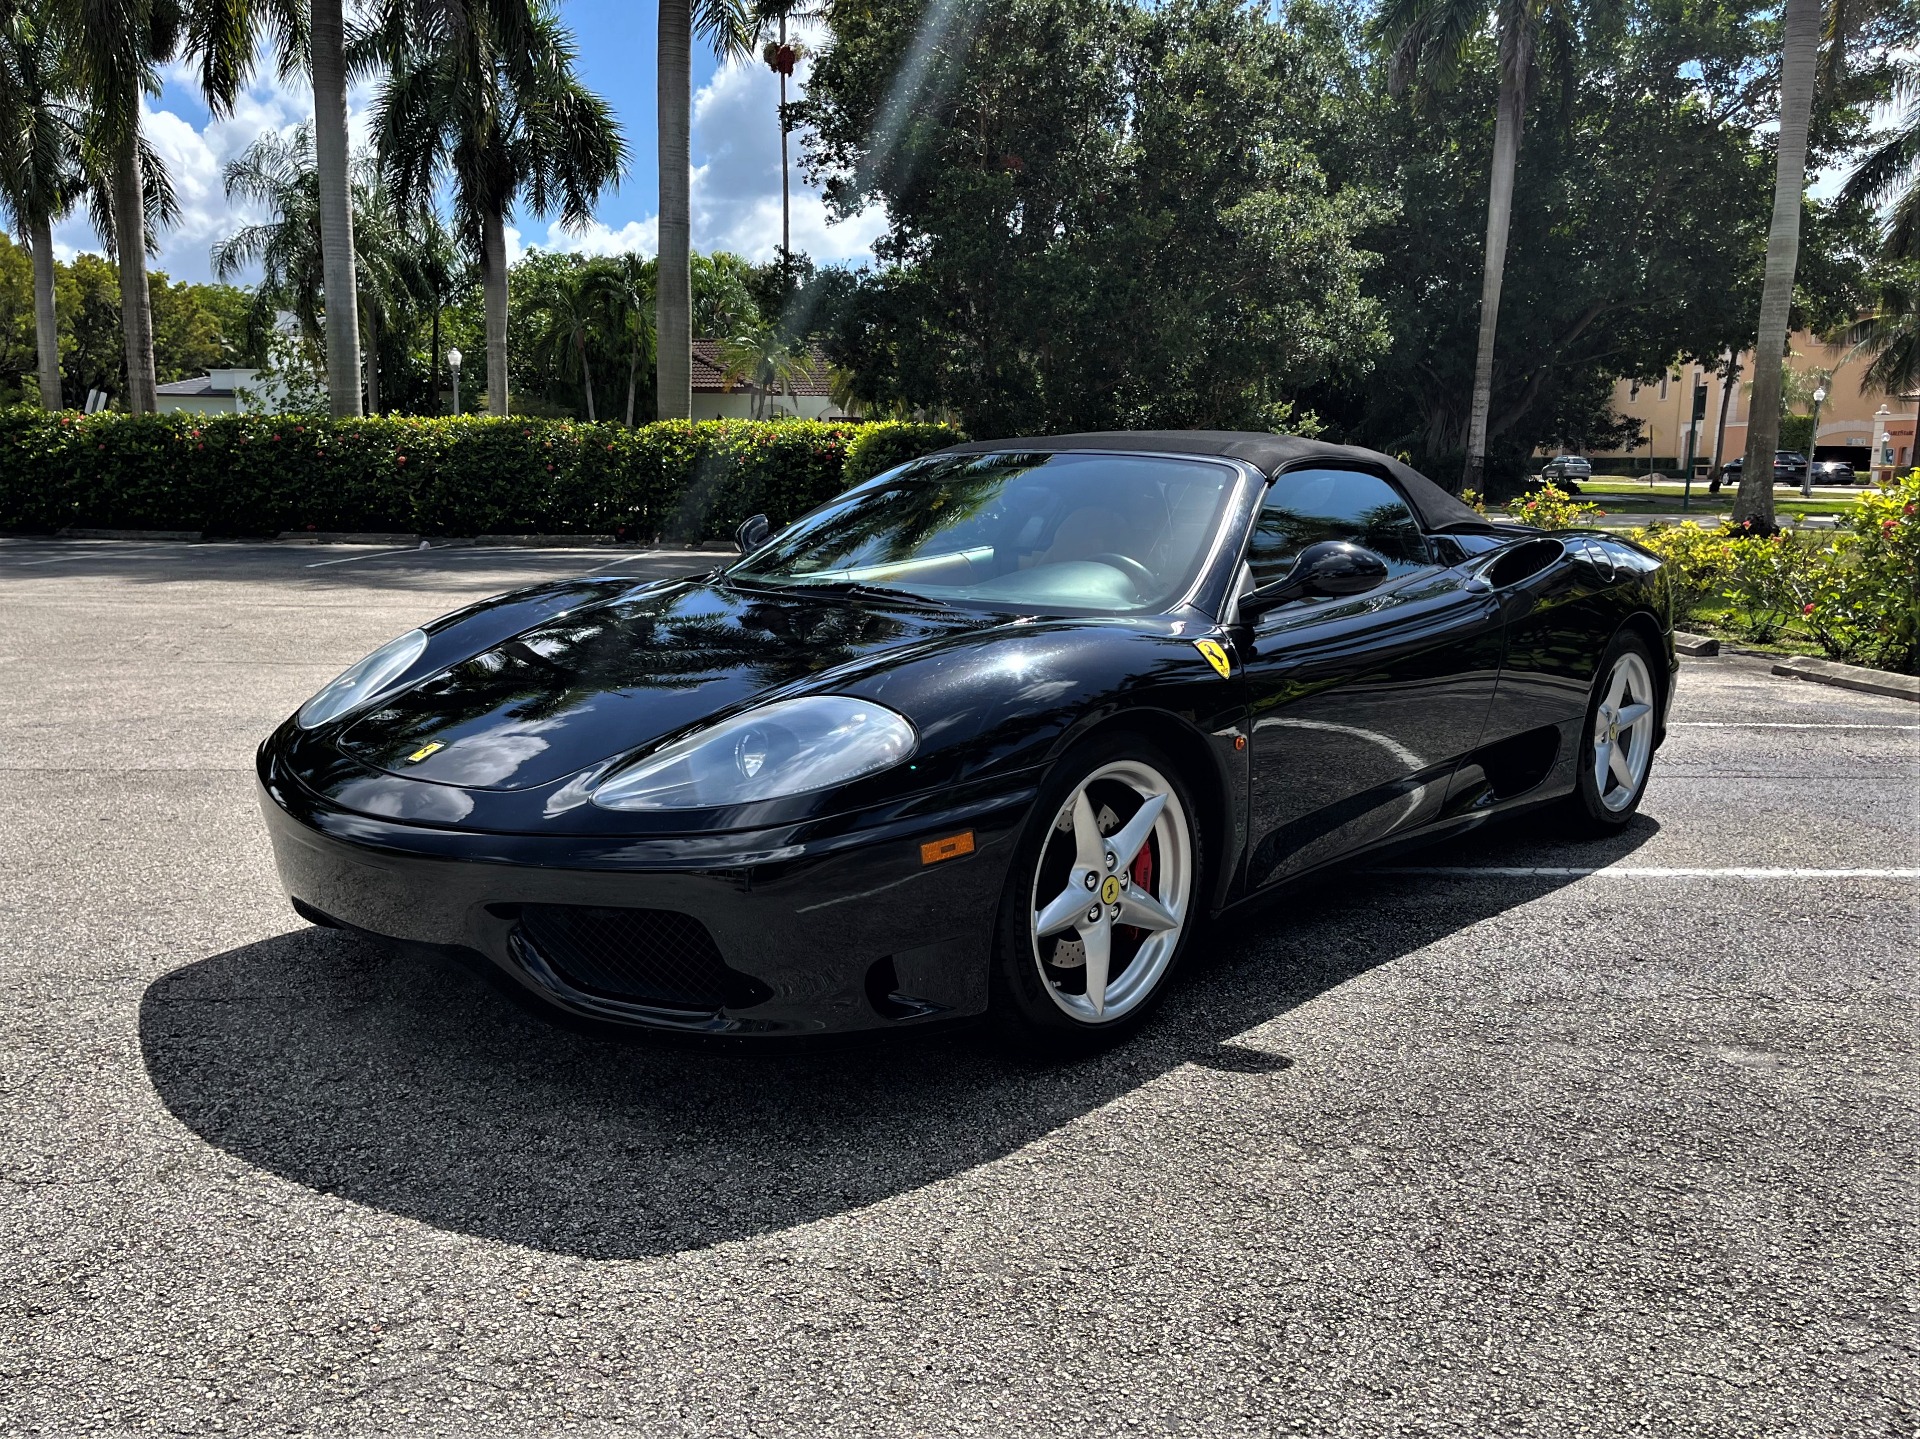 Used 2003 Ferrari 360 Spider for sale $98,850 at The Gables Sports Cars in Miami FL 33146 2